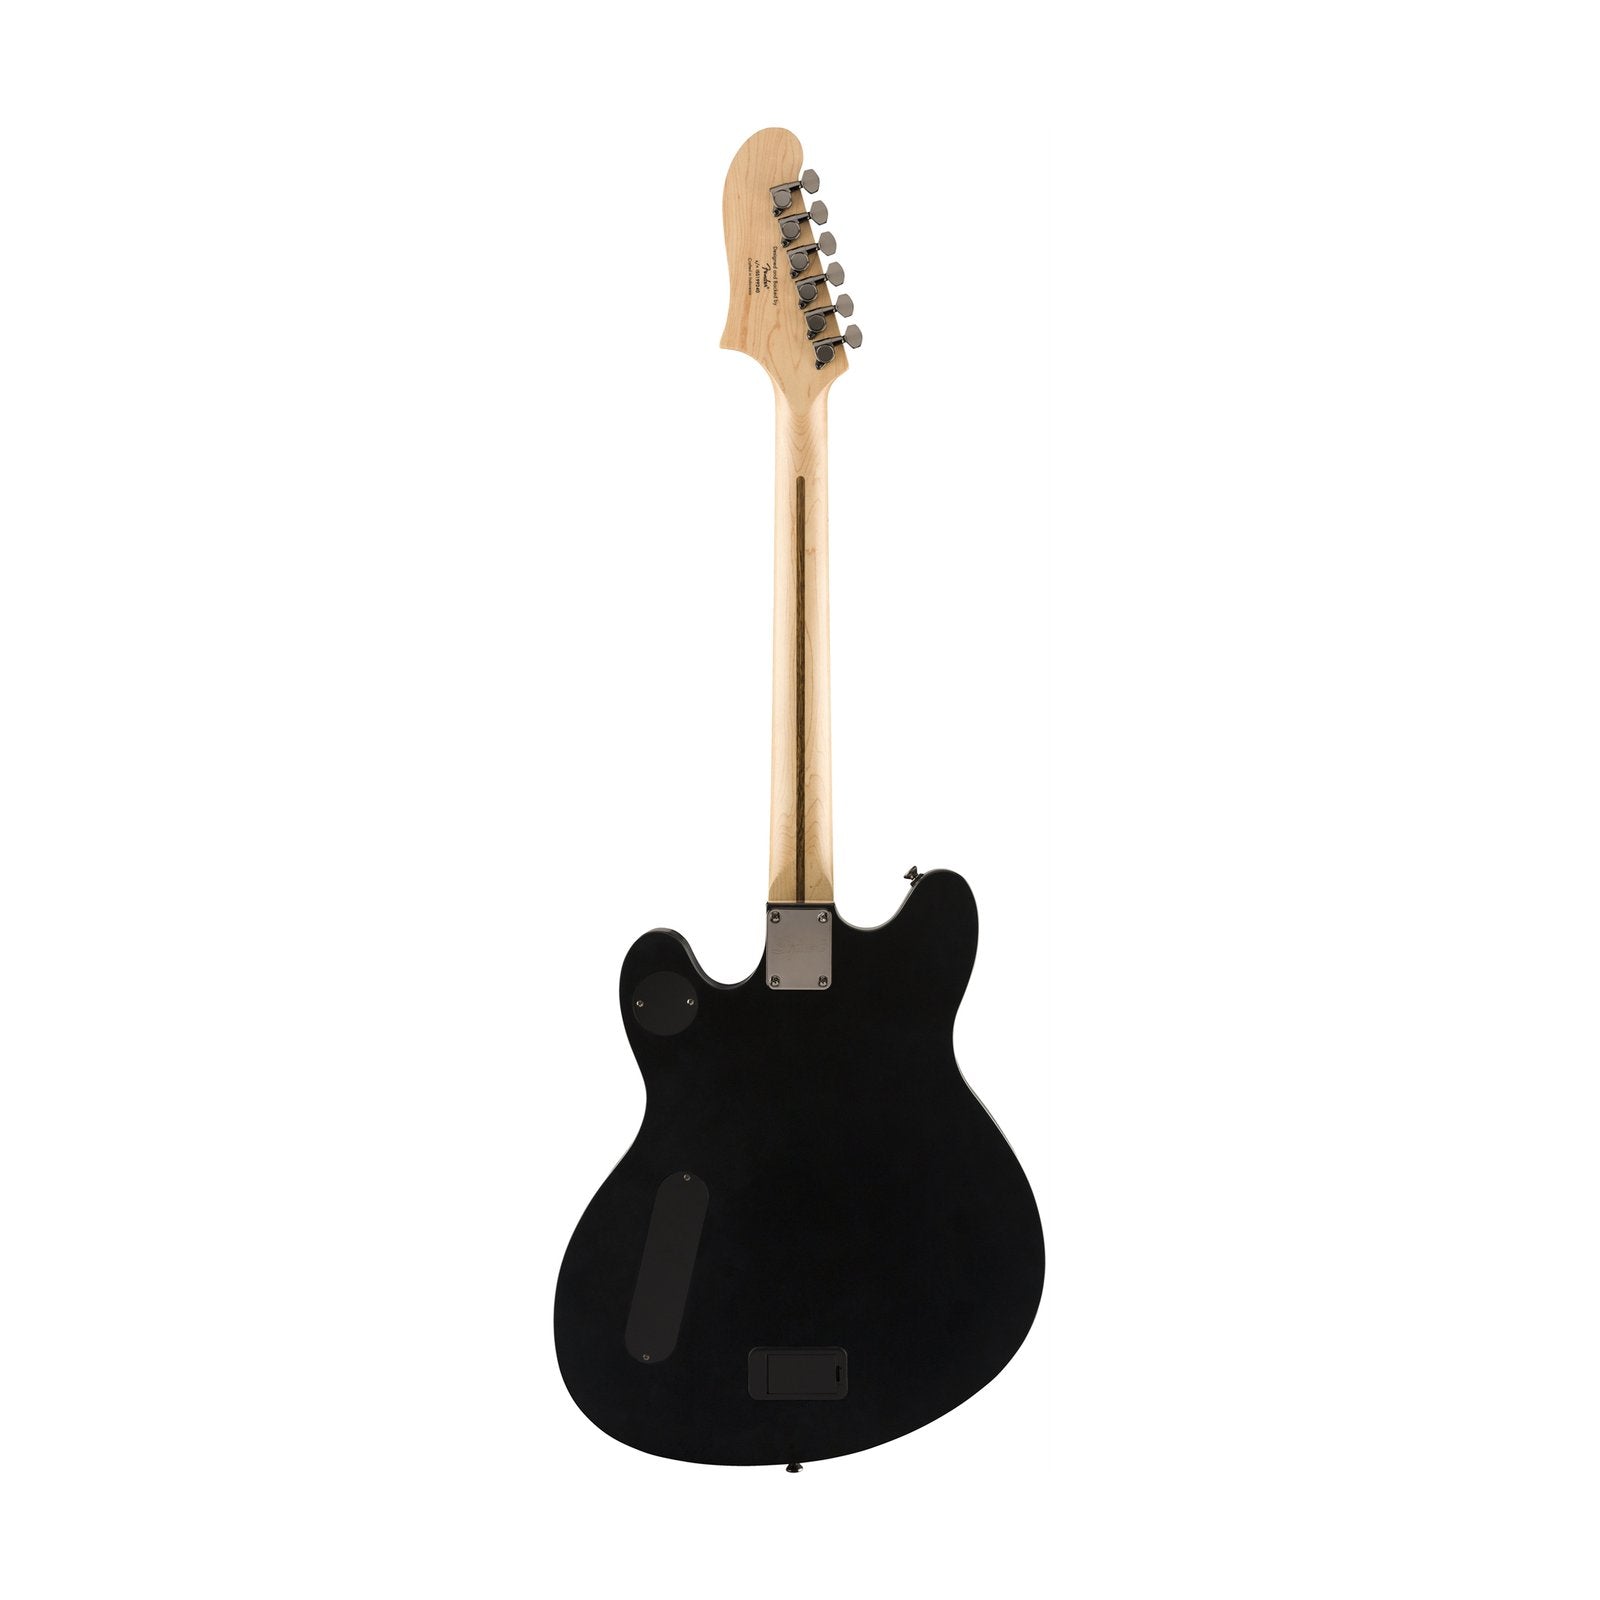 Squier Contemporary Starcaster Electric Guitar, Maple FB, Flat Black, SQUIER BY FENDER, ELECTRIC GUITAR, squier-by-fender-electric-guitar-037-0470-510, ZOSO MUSIC SDN BHD